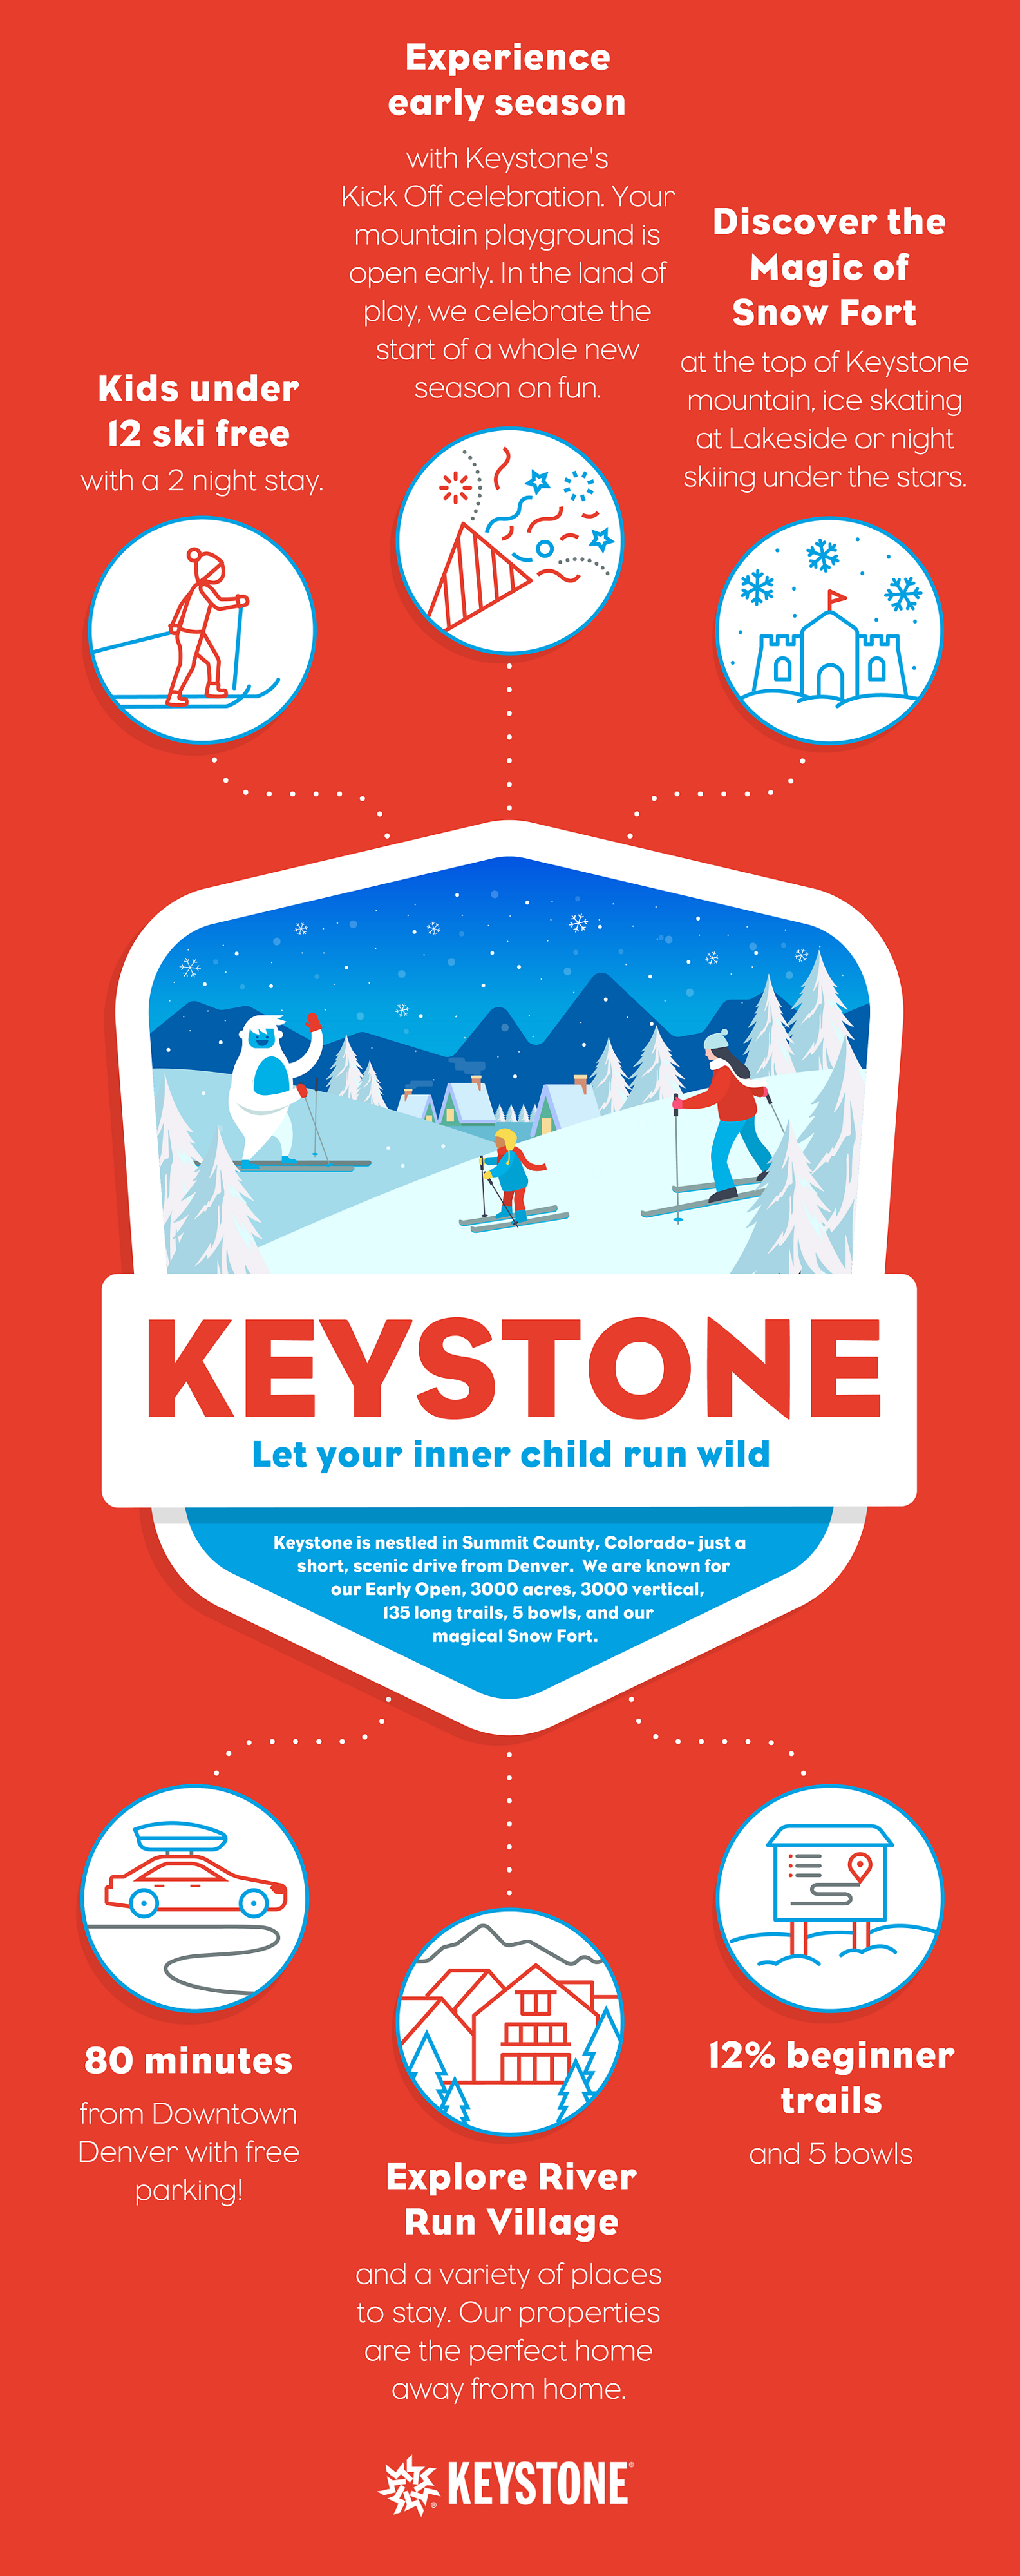 An infographic displaying key facts about Keystone resort, including: explore river run village, experience the magic of Snow Fort, Keystone's 80 minute distance from downtown Denver, kids under 12 ski free with a 2 night stay, and 12% beginner trails.